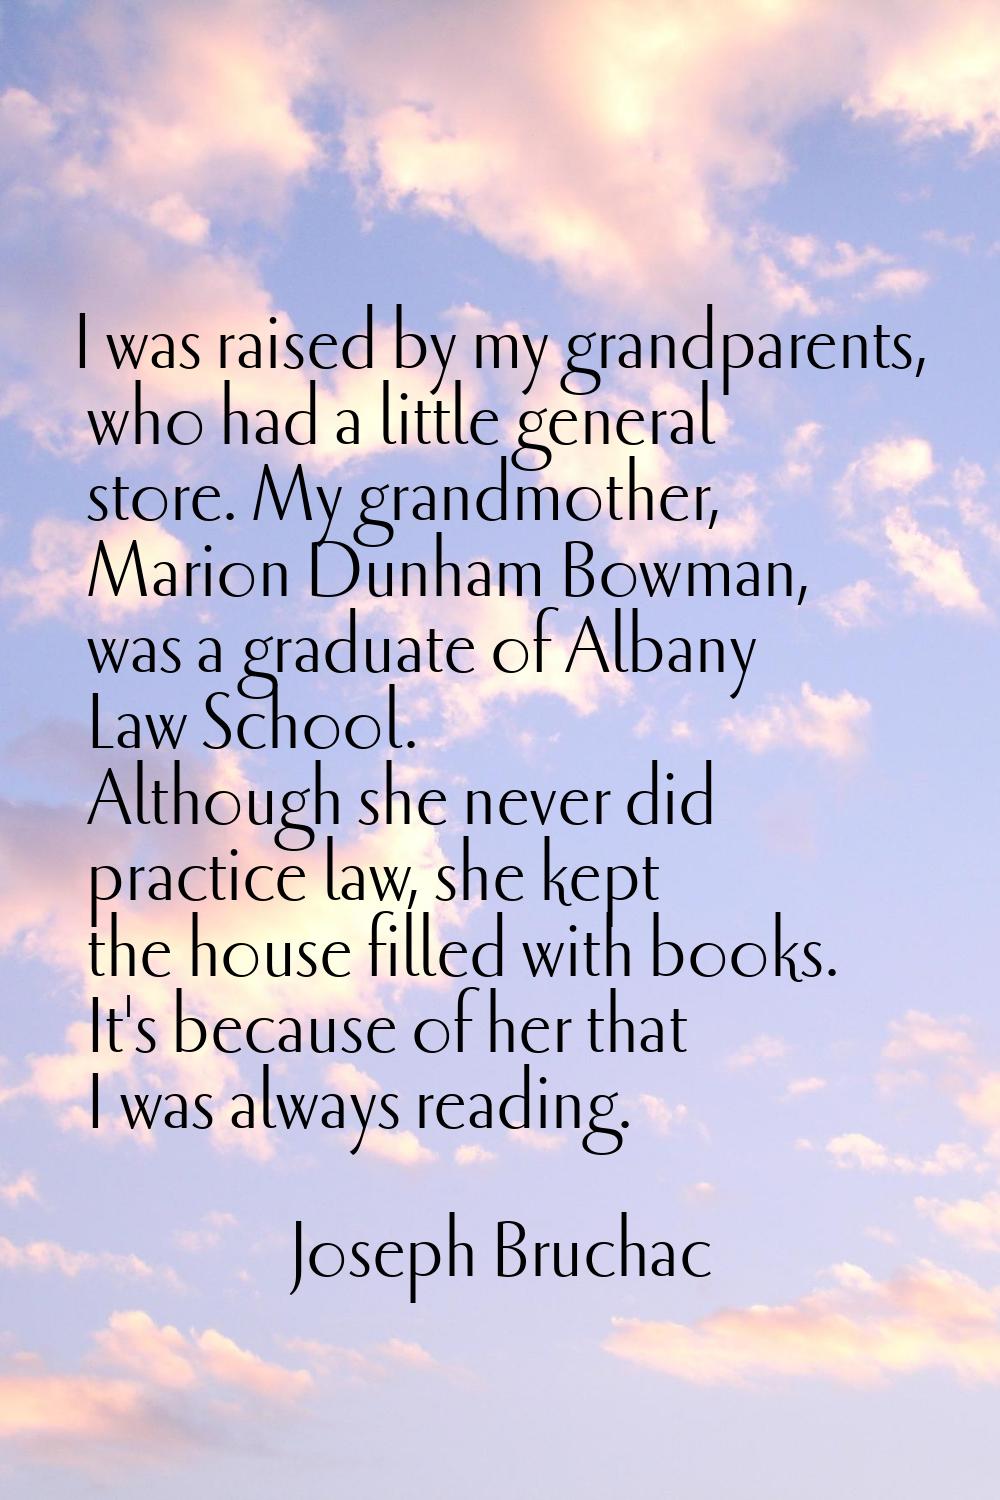 I was raised by my grandparents, who had a little general store. My grandmother, Marion Dunham Bowm